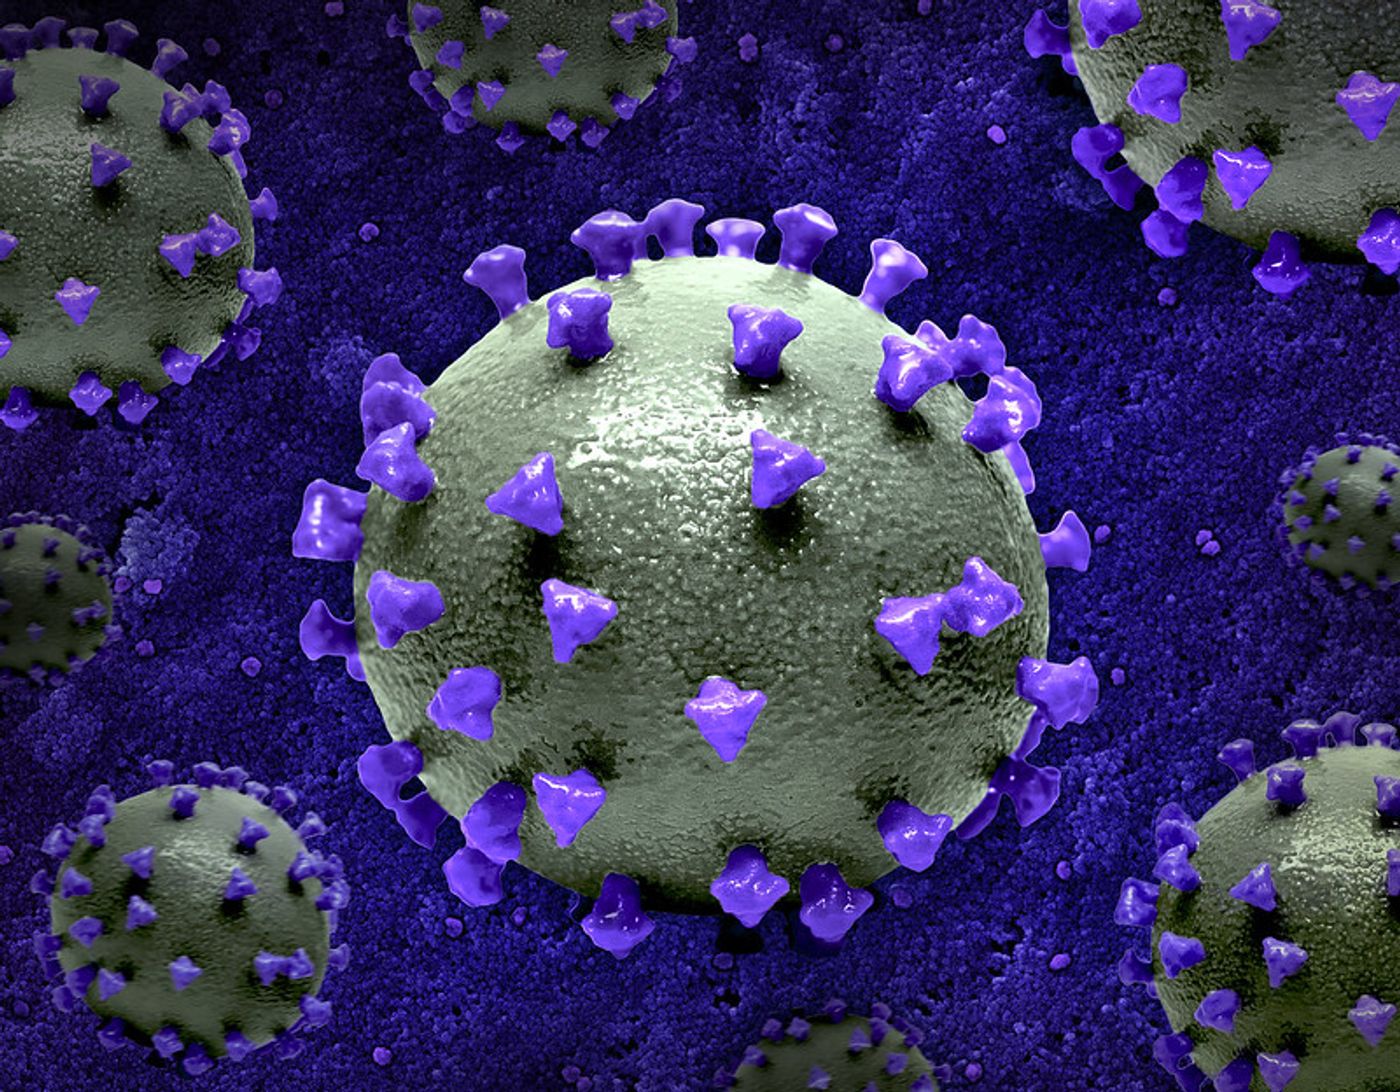 Layout featuring multiple 3D prints of a SARS-CoV-2 virus particle (gray viral surface with purple spike proteins) against a background image that is a colorized scanning electron micrograph of a VERO E6 cell (dark blue) infected with the Omicron strain of SARS-CoV-2 virus particles (purple), isolated from a patient sample. 3D print is courtesy of the NIH 3D Print Exchange (3dprint.nih.gov); micrograph captured at the NIAID Integrated Research Facility (IRF) in Fort Detrick, Maryland. Note: not to scale. Credit: NIAID